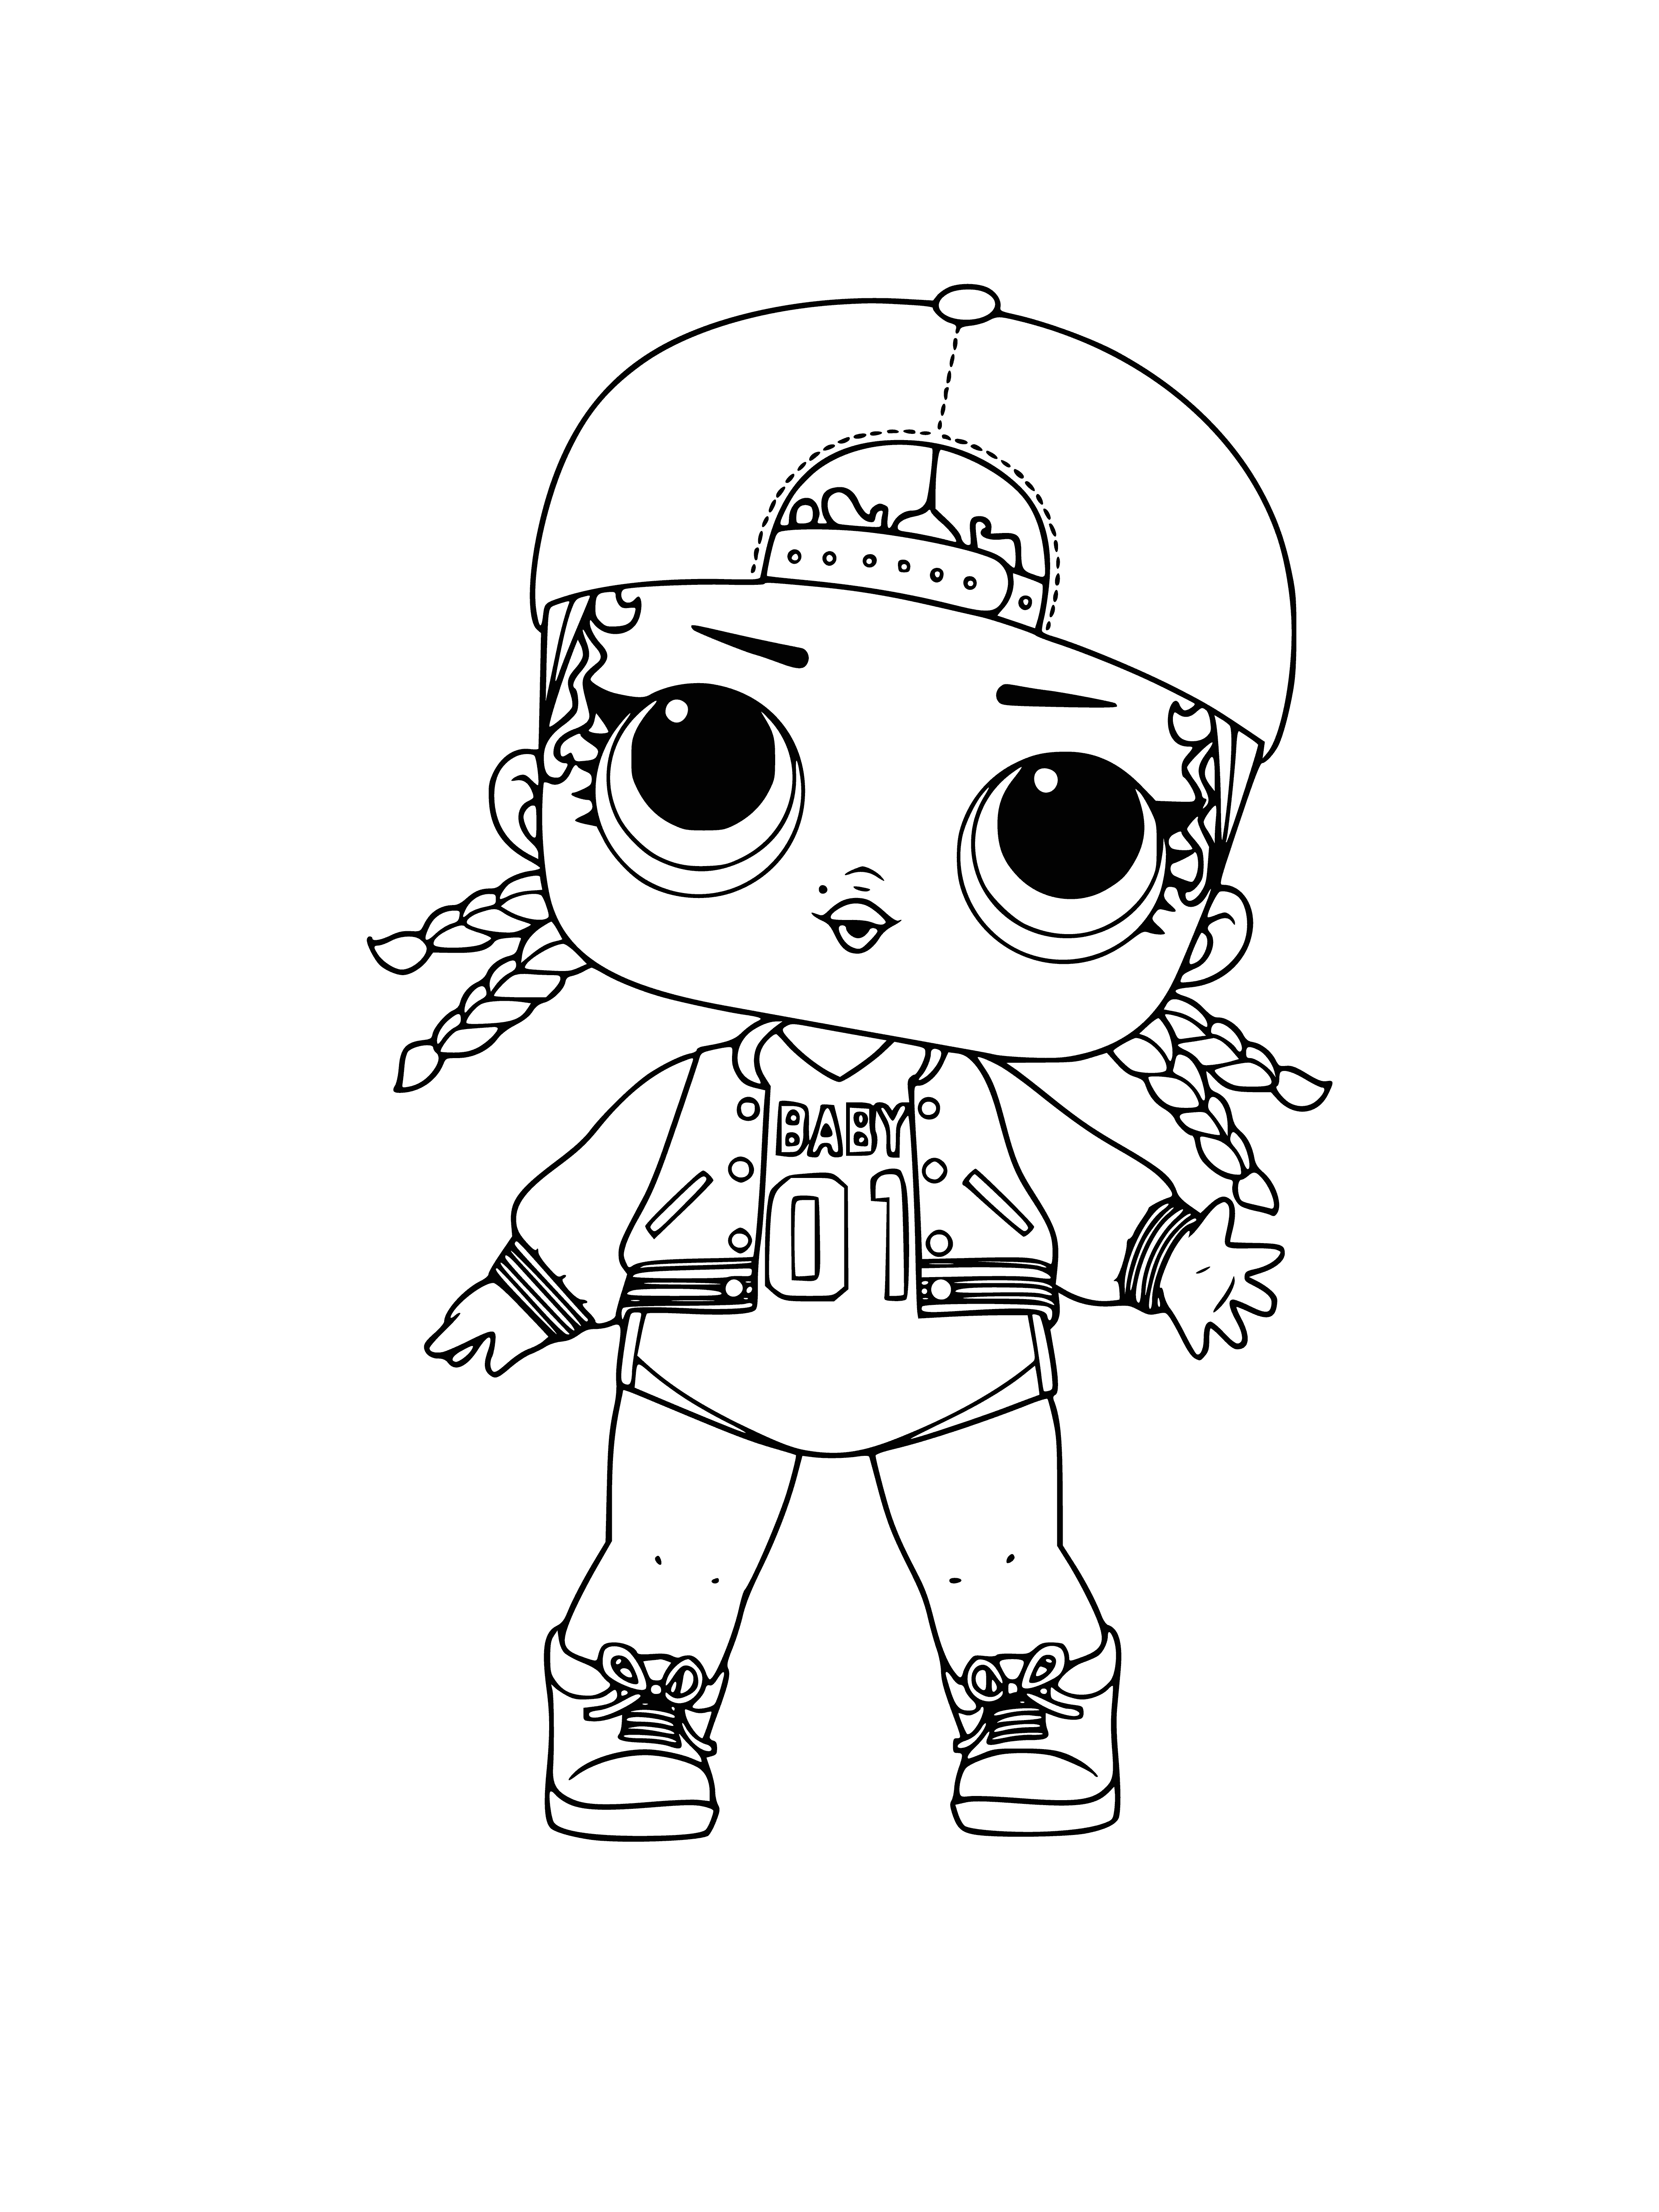 LOL doll MC Swag series 1 coloring page